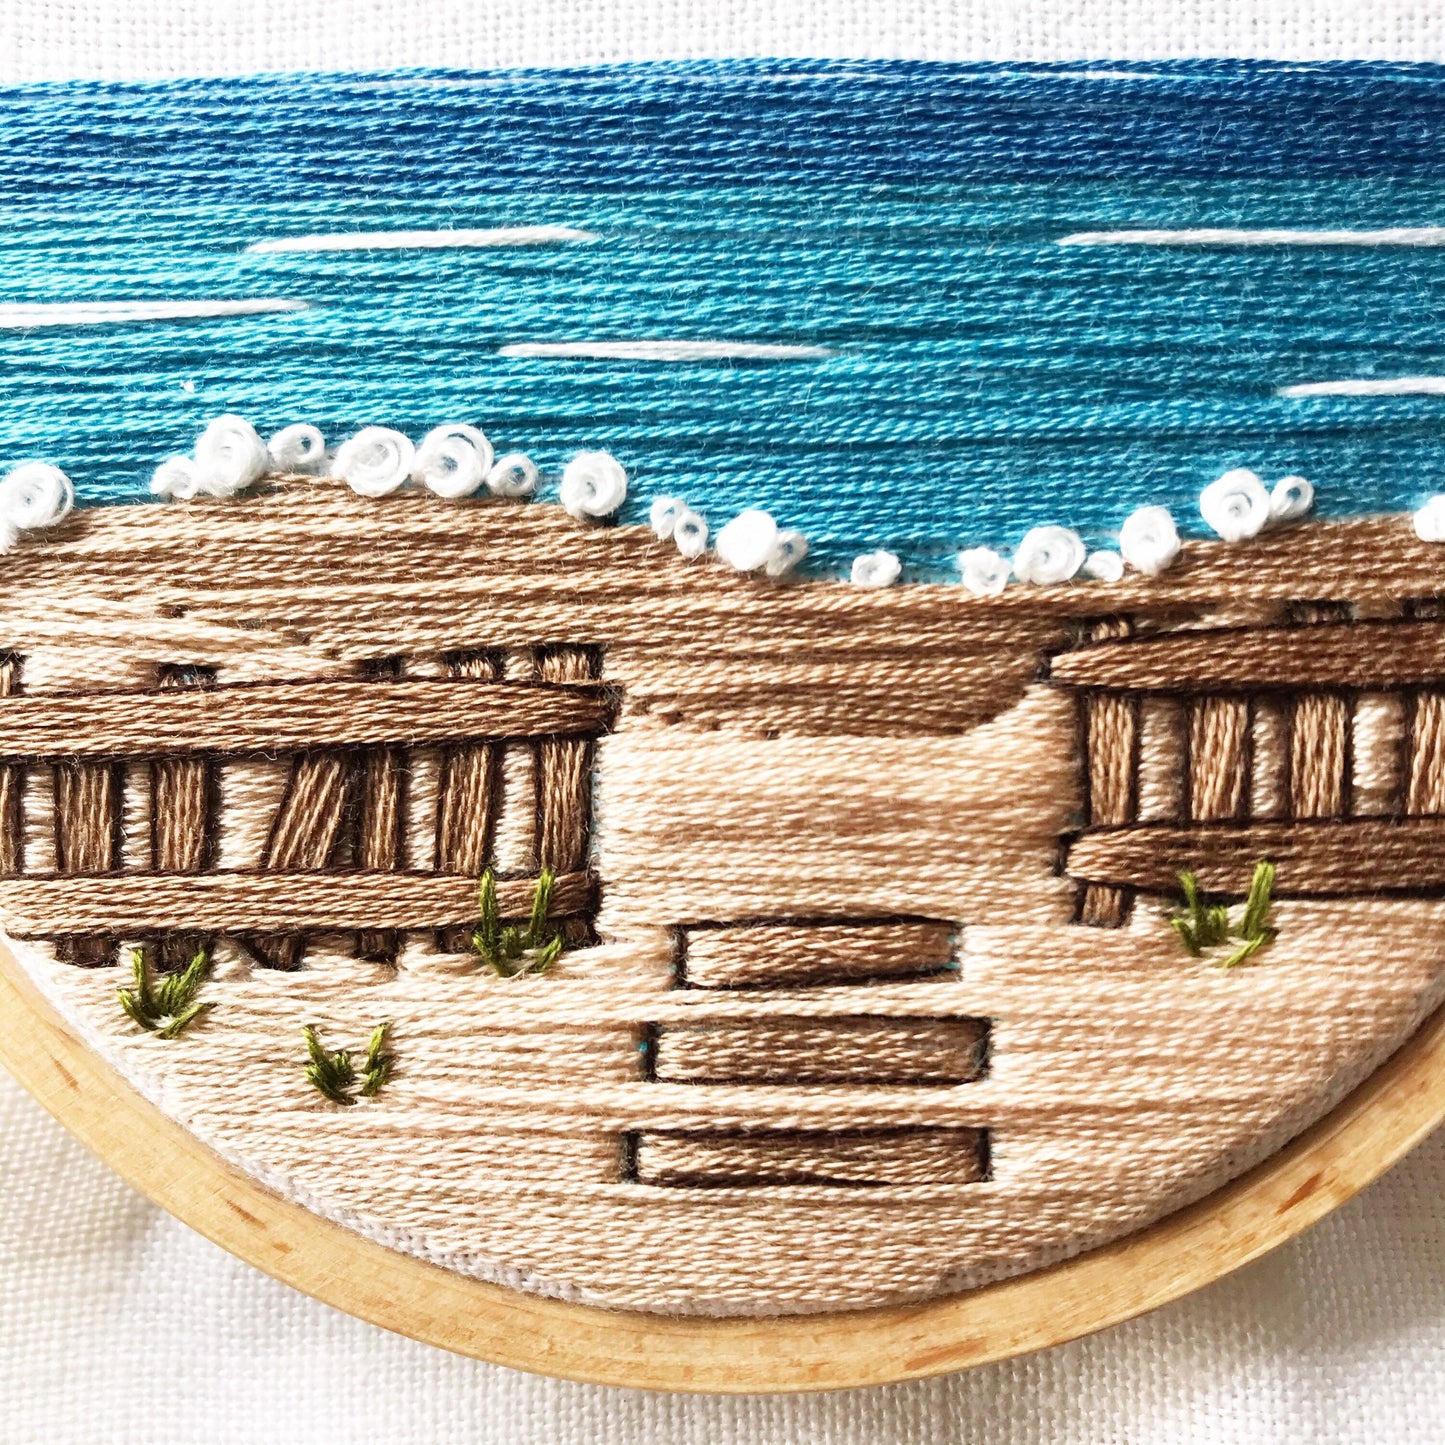 Day at the Beach: Intermediate Embroidery Kit